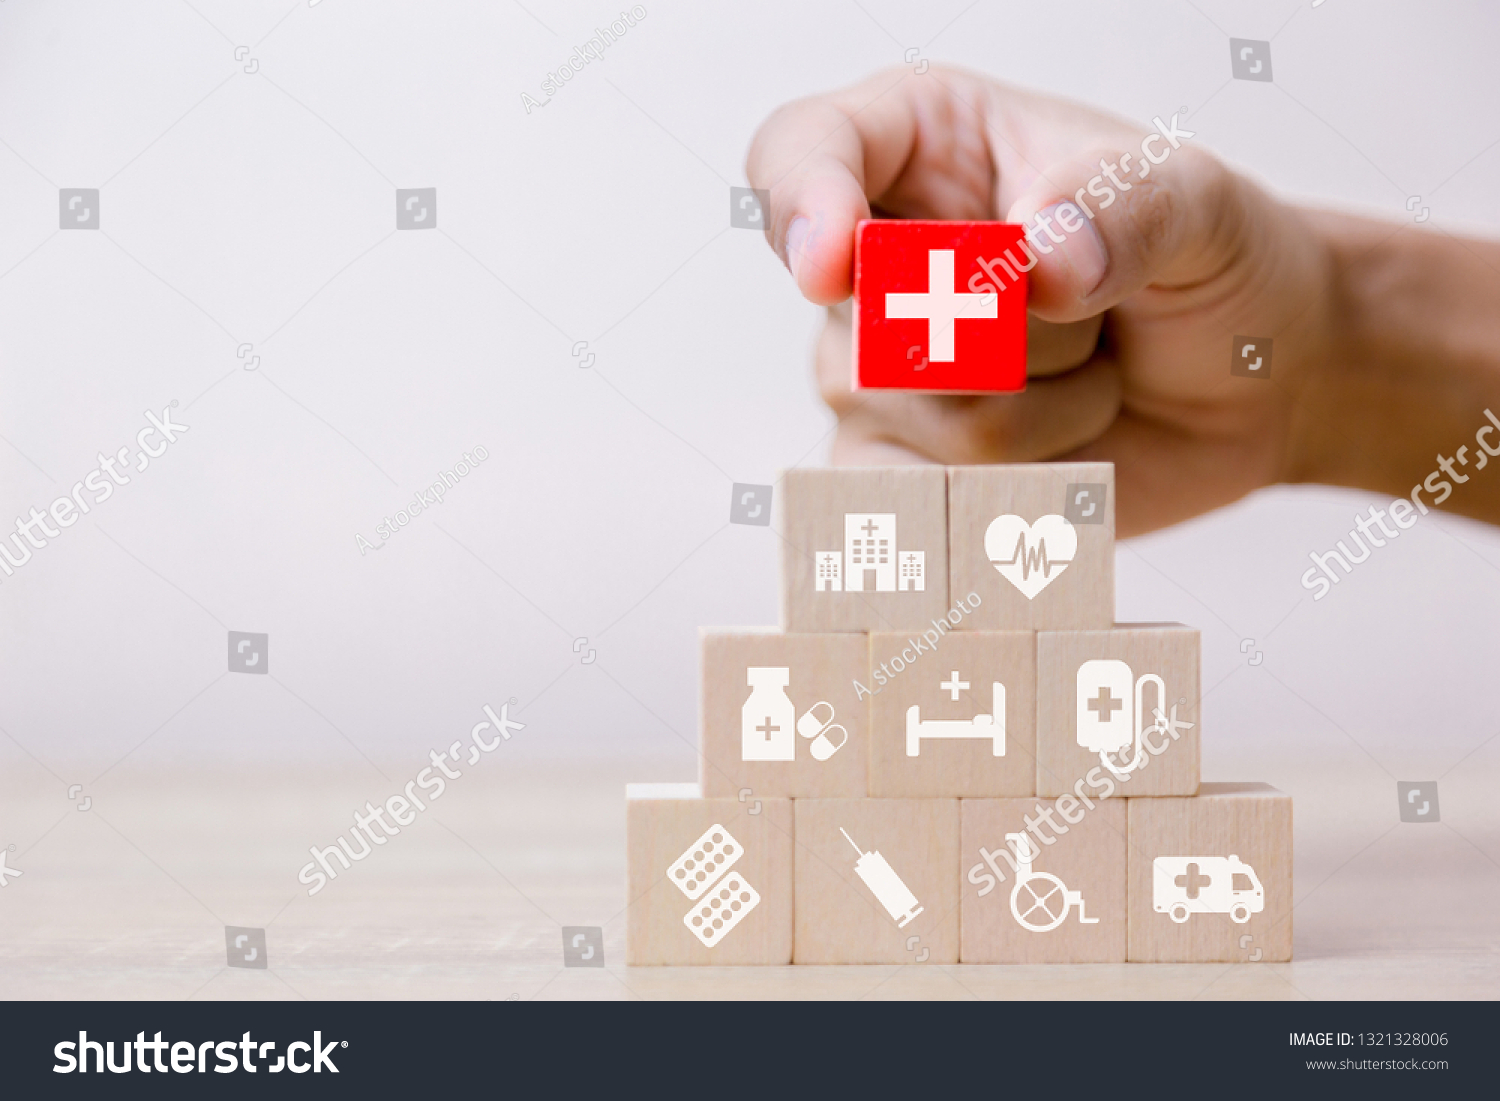 Health Insurance Concept,hand arranging wood block stacking with icon healthcare medical,for health. #1321328006